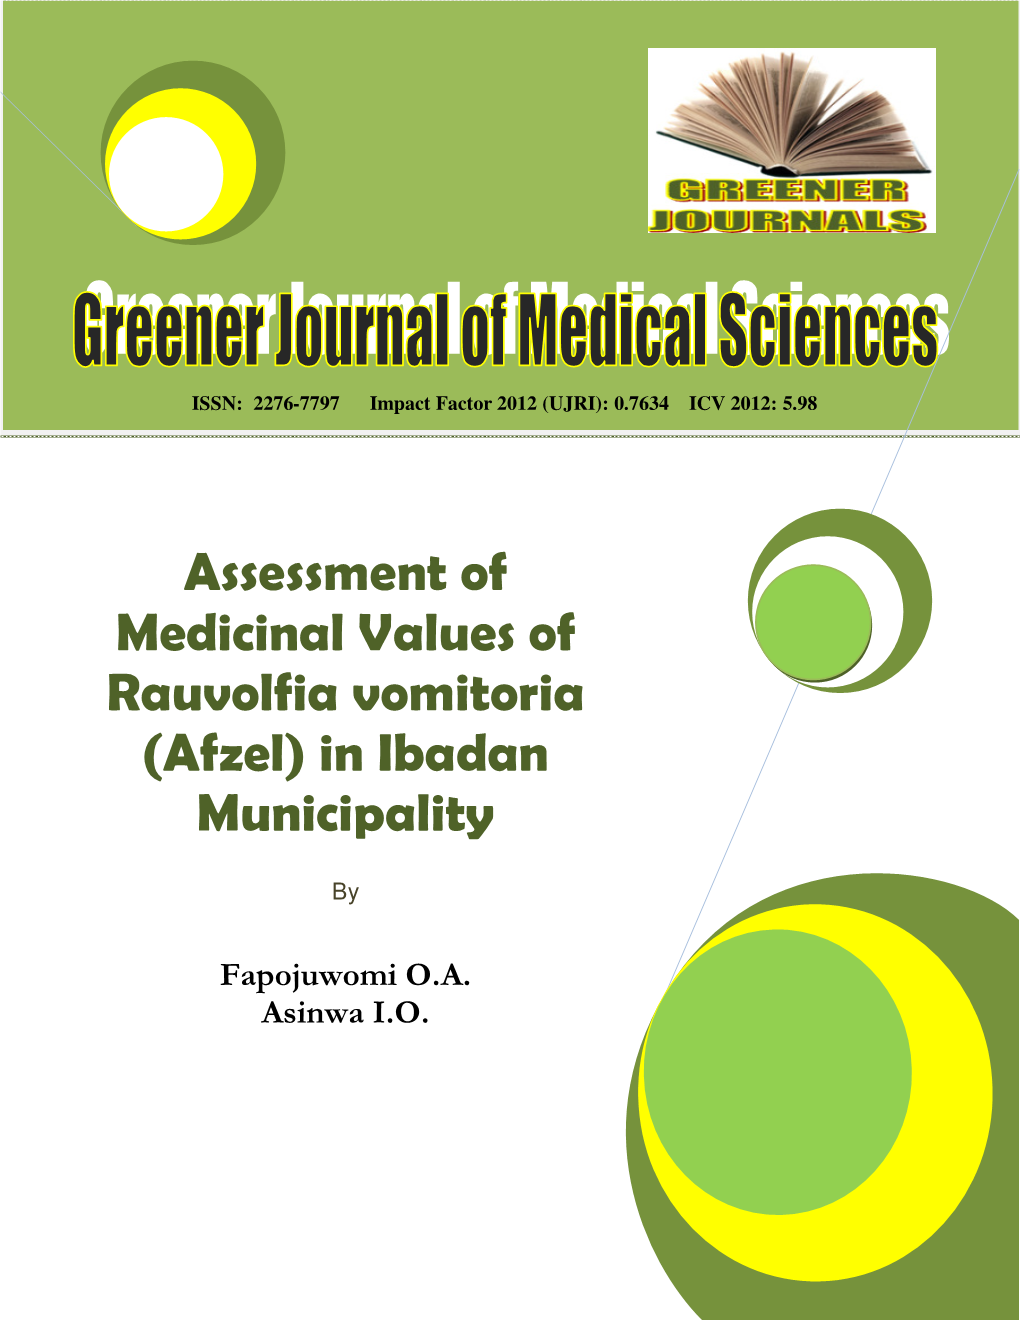 Assessment of Medicinal Values of Rauvolfia Vomitoria (Afzel) in Ibadan Municipality